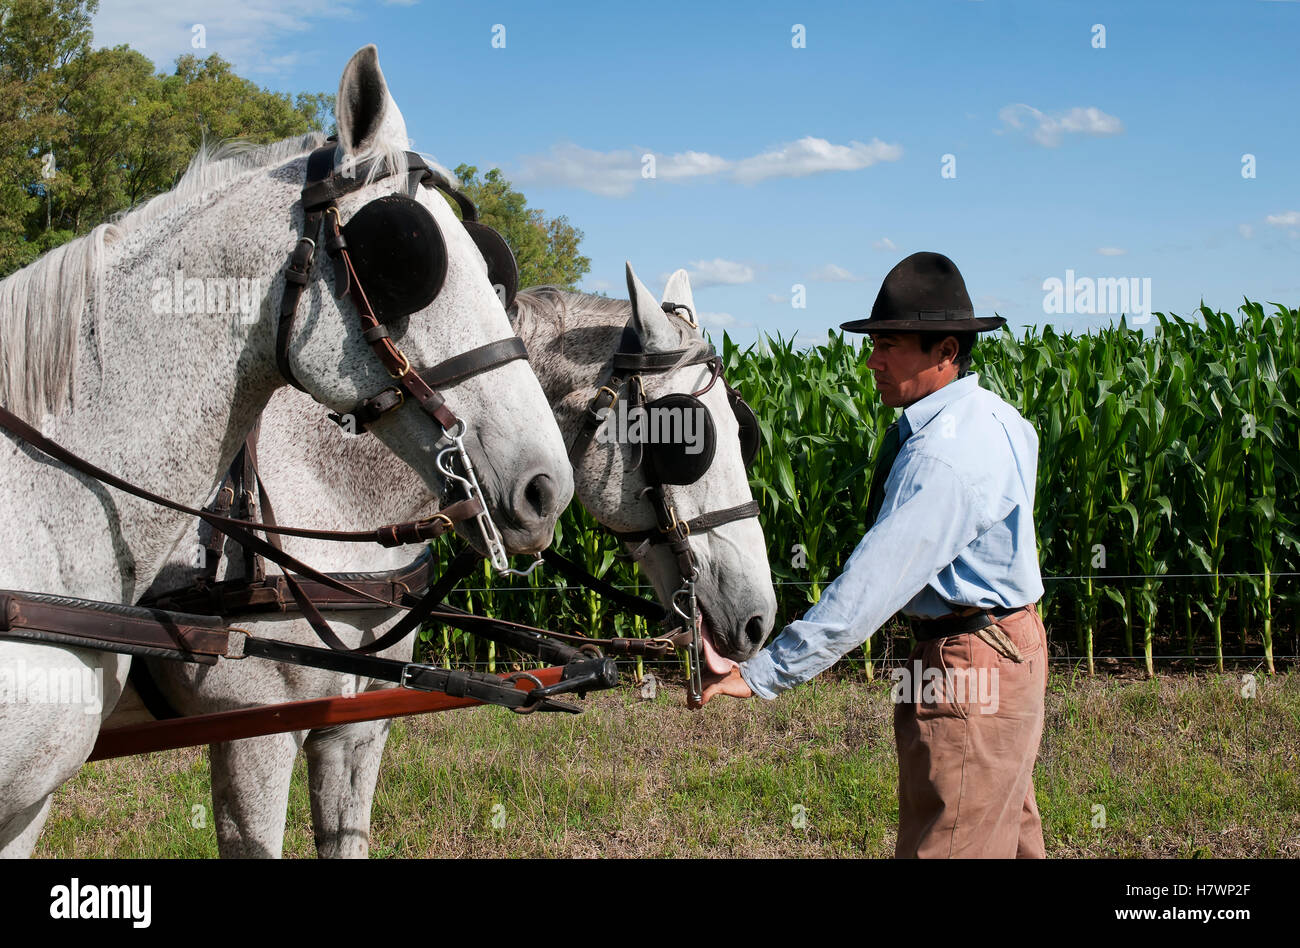 Farmer with farm horses hitched to a cart, crop in the background; Argentina Stock Photo